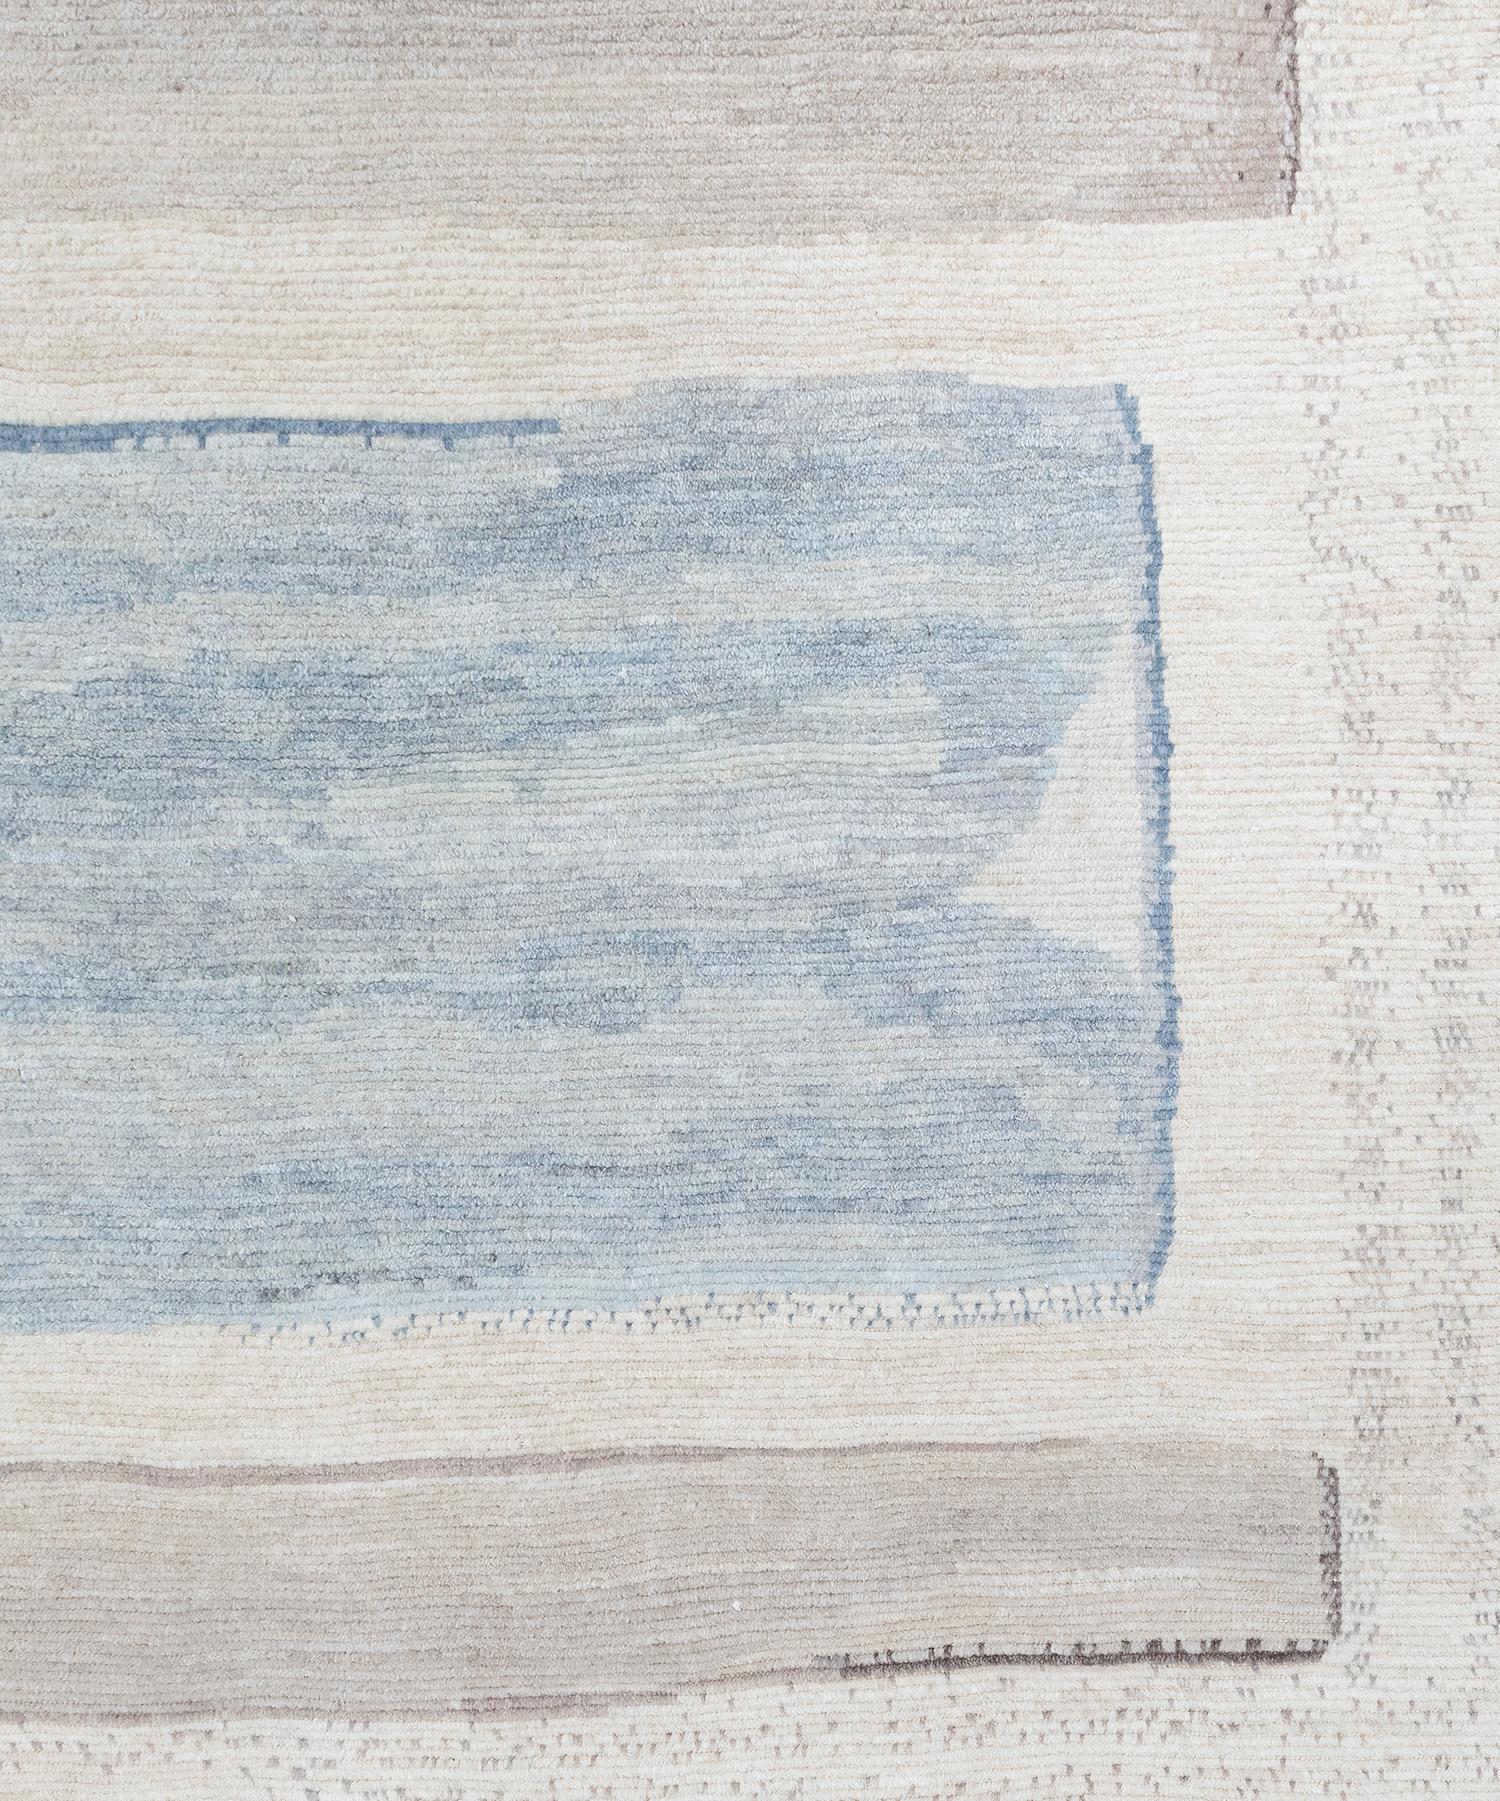 Our Nevis rug is handknotted using the finest quality hand-spun wool and natural dyes. This minimalist and modern design blends neutral beige and ivory tones with a pop of cool blues. Custom sizes and colors available.

